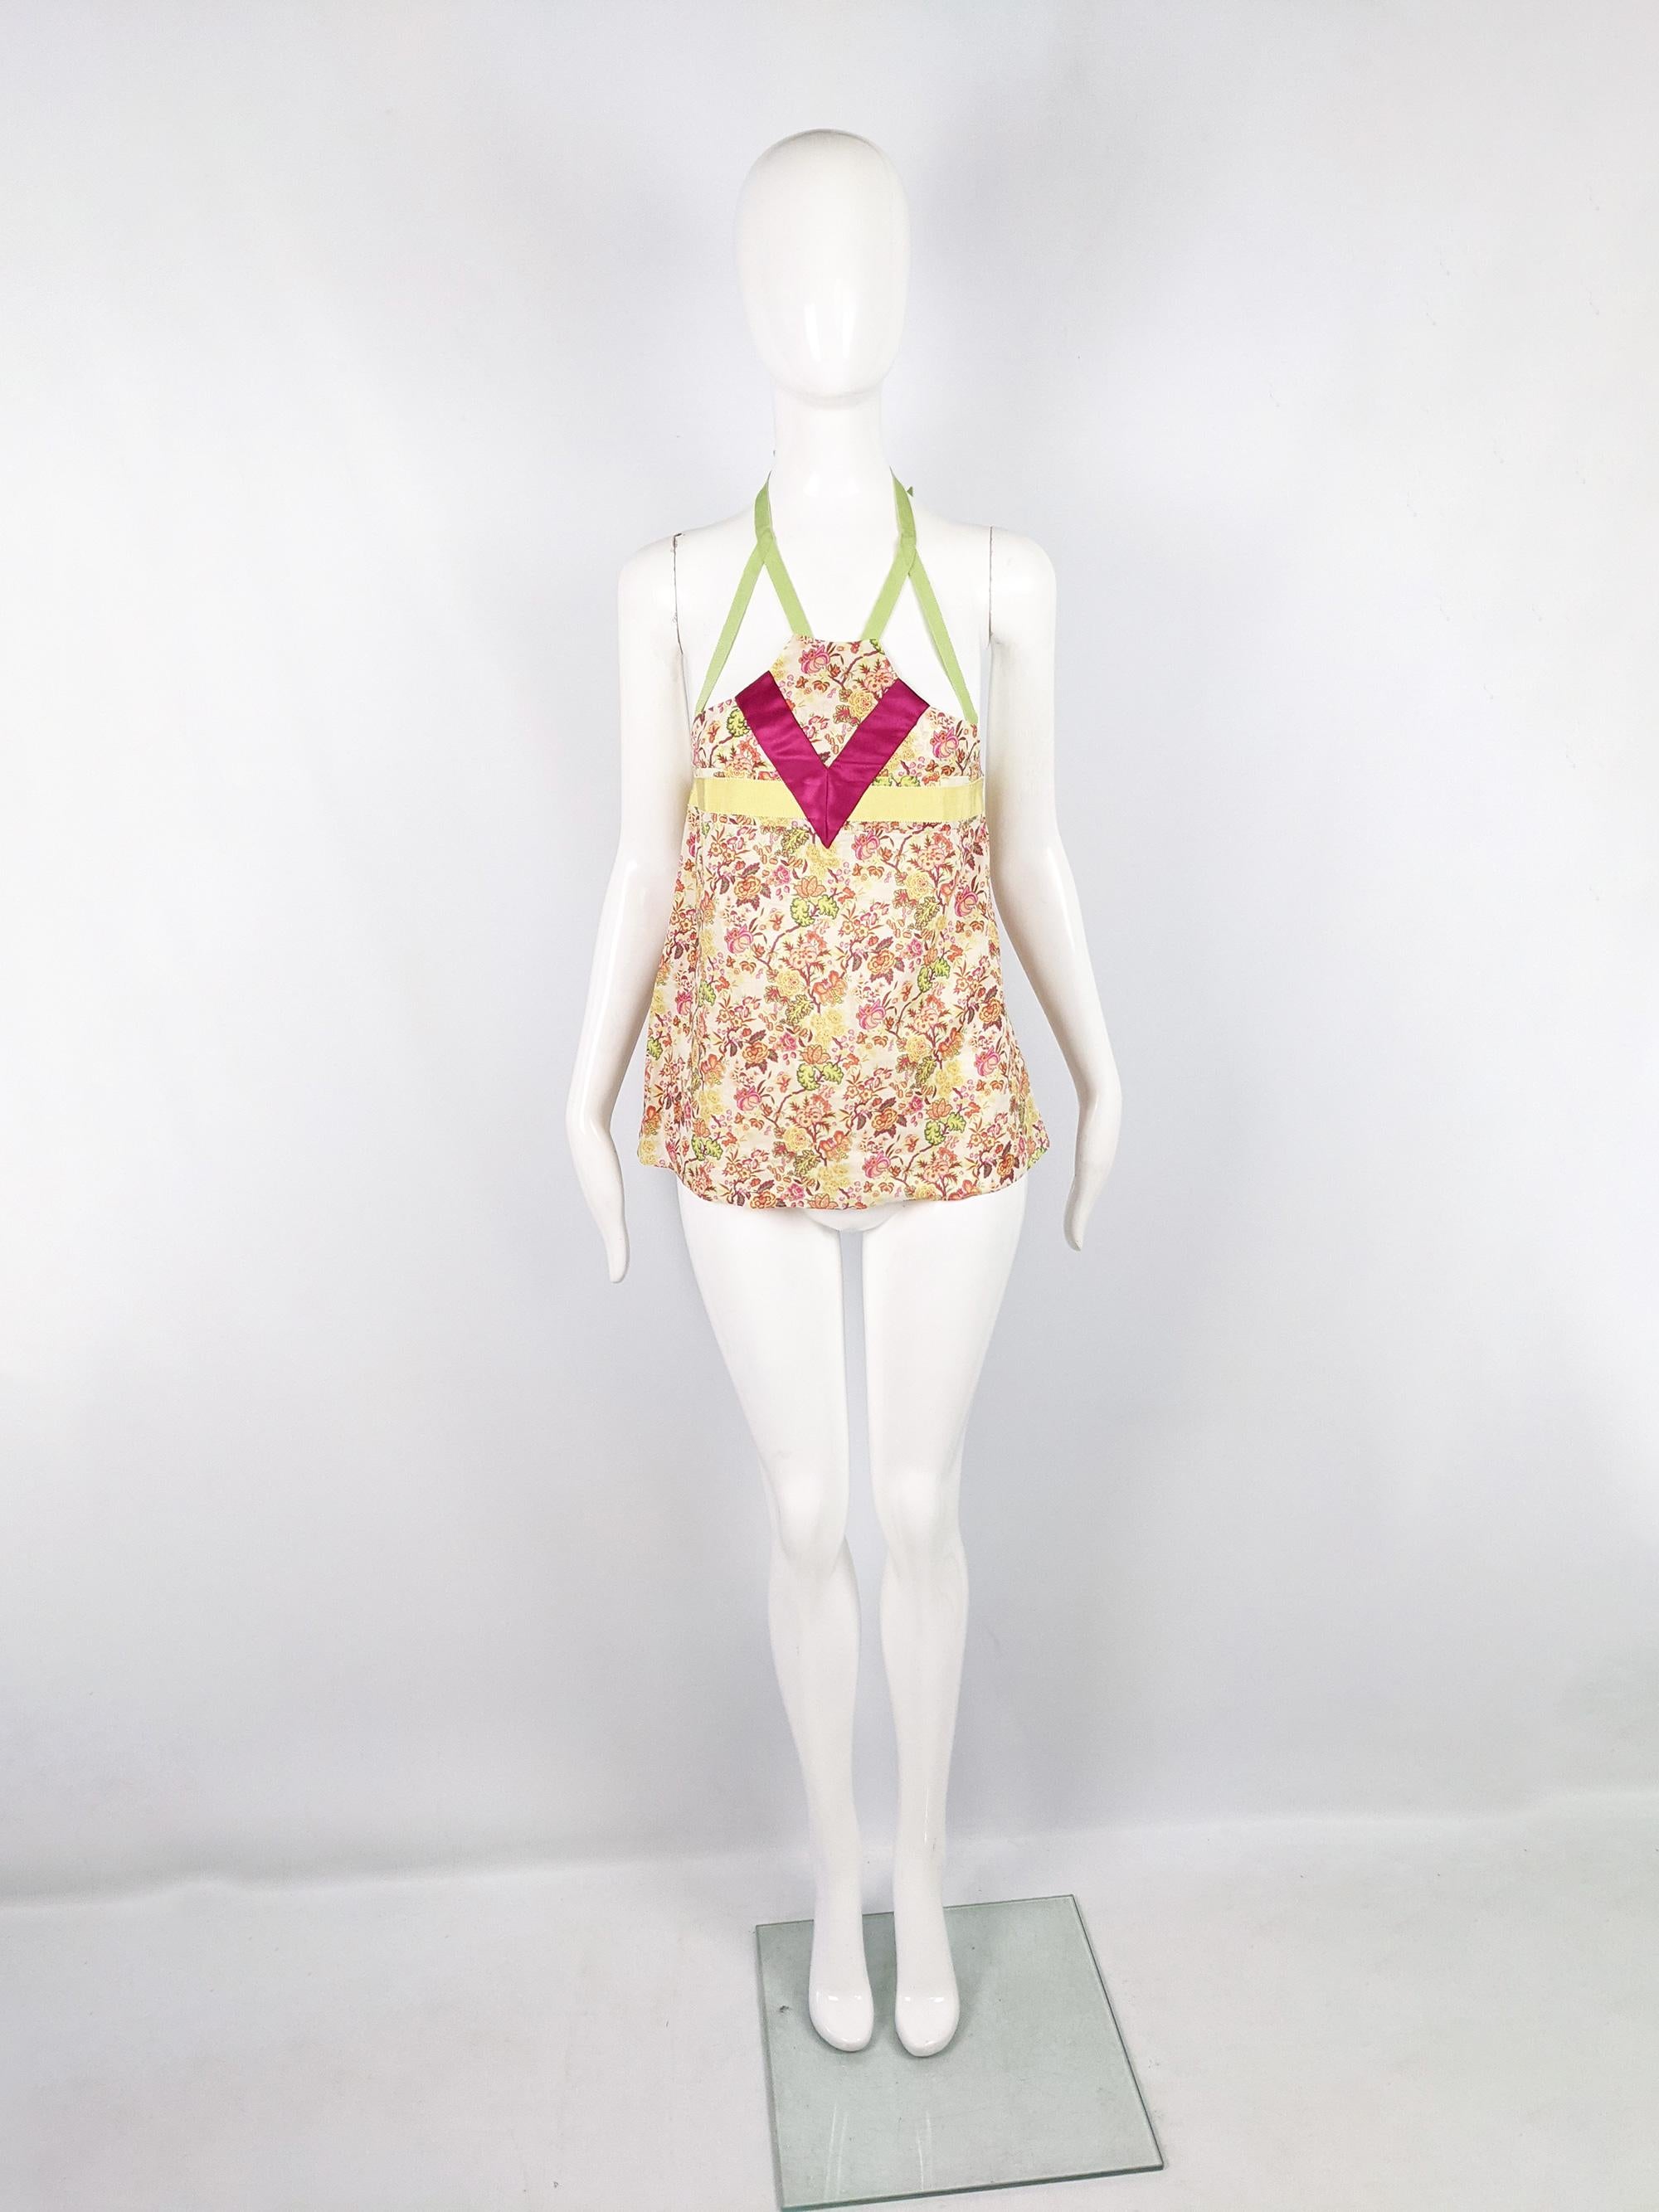 A super cute y2k vintage Kenzo top from the early 2000s. In a floral print cotton with pink and yellow satin panels across and a green grosgrain halter neck tie that ties around the back of the neck. With a cut that flares outwards from the bust.